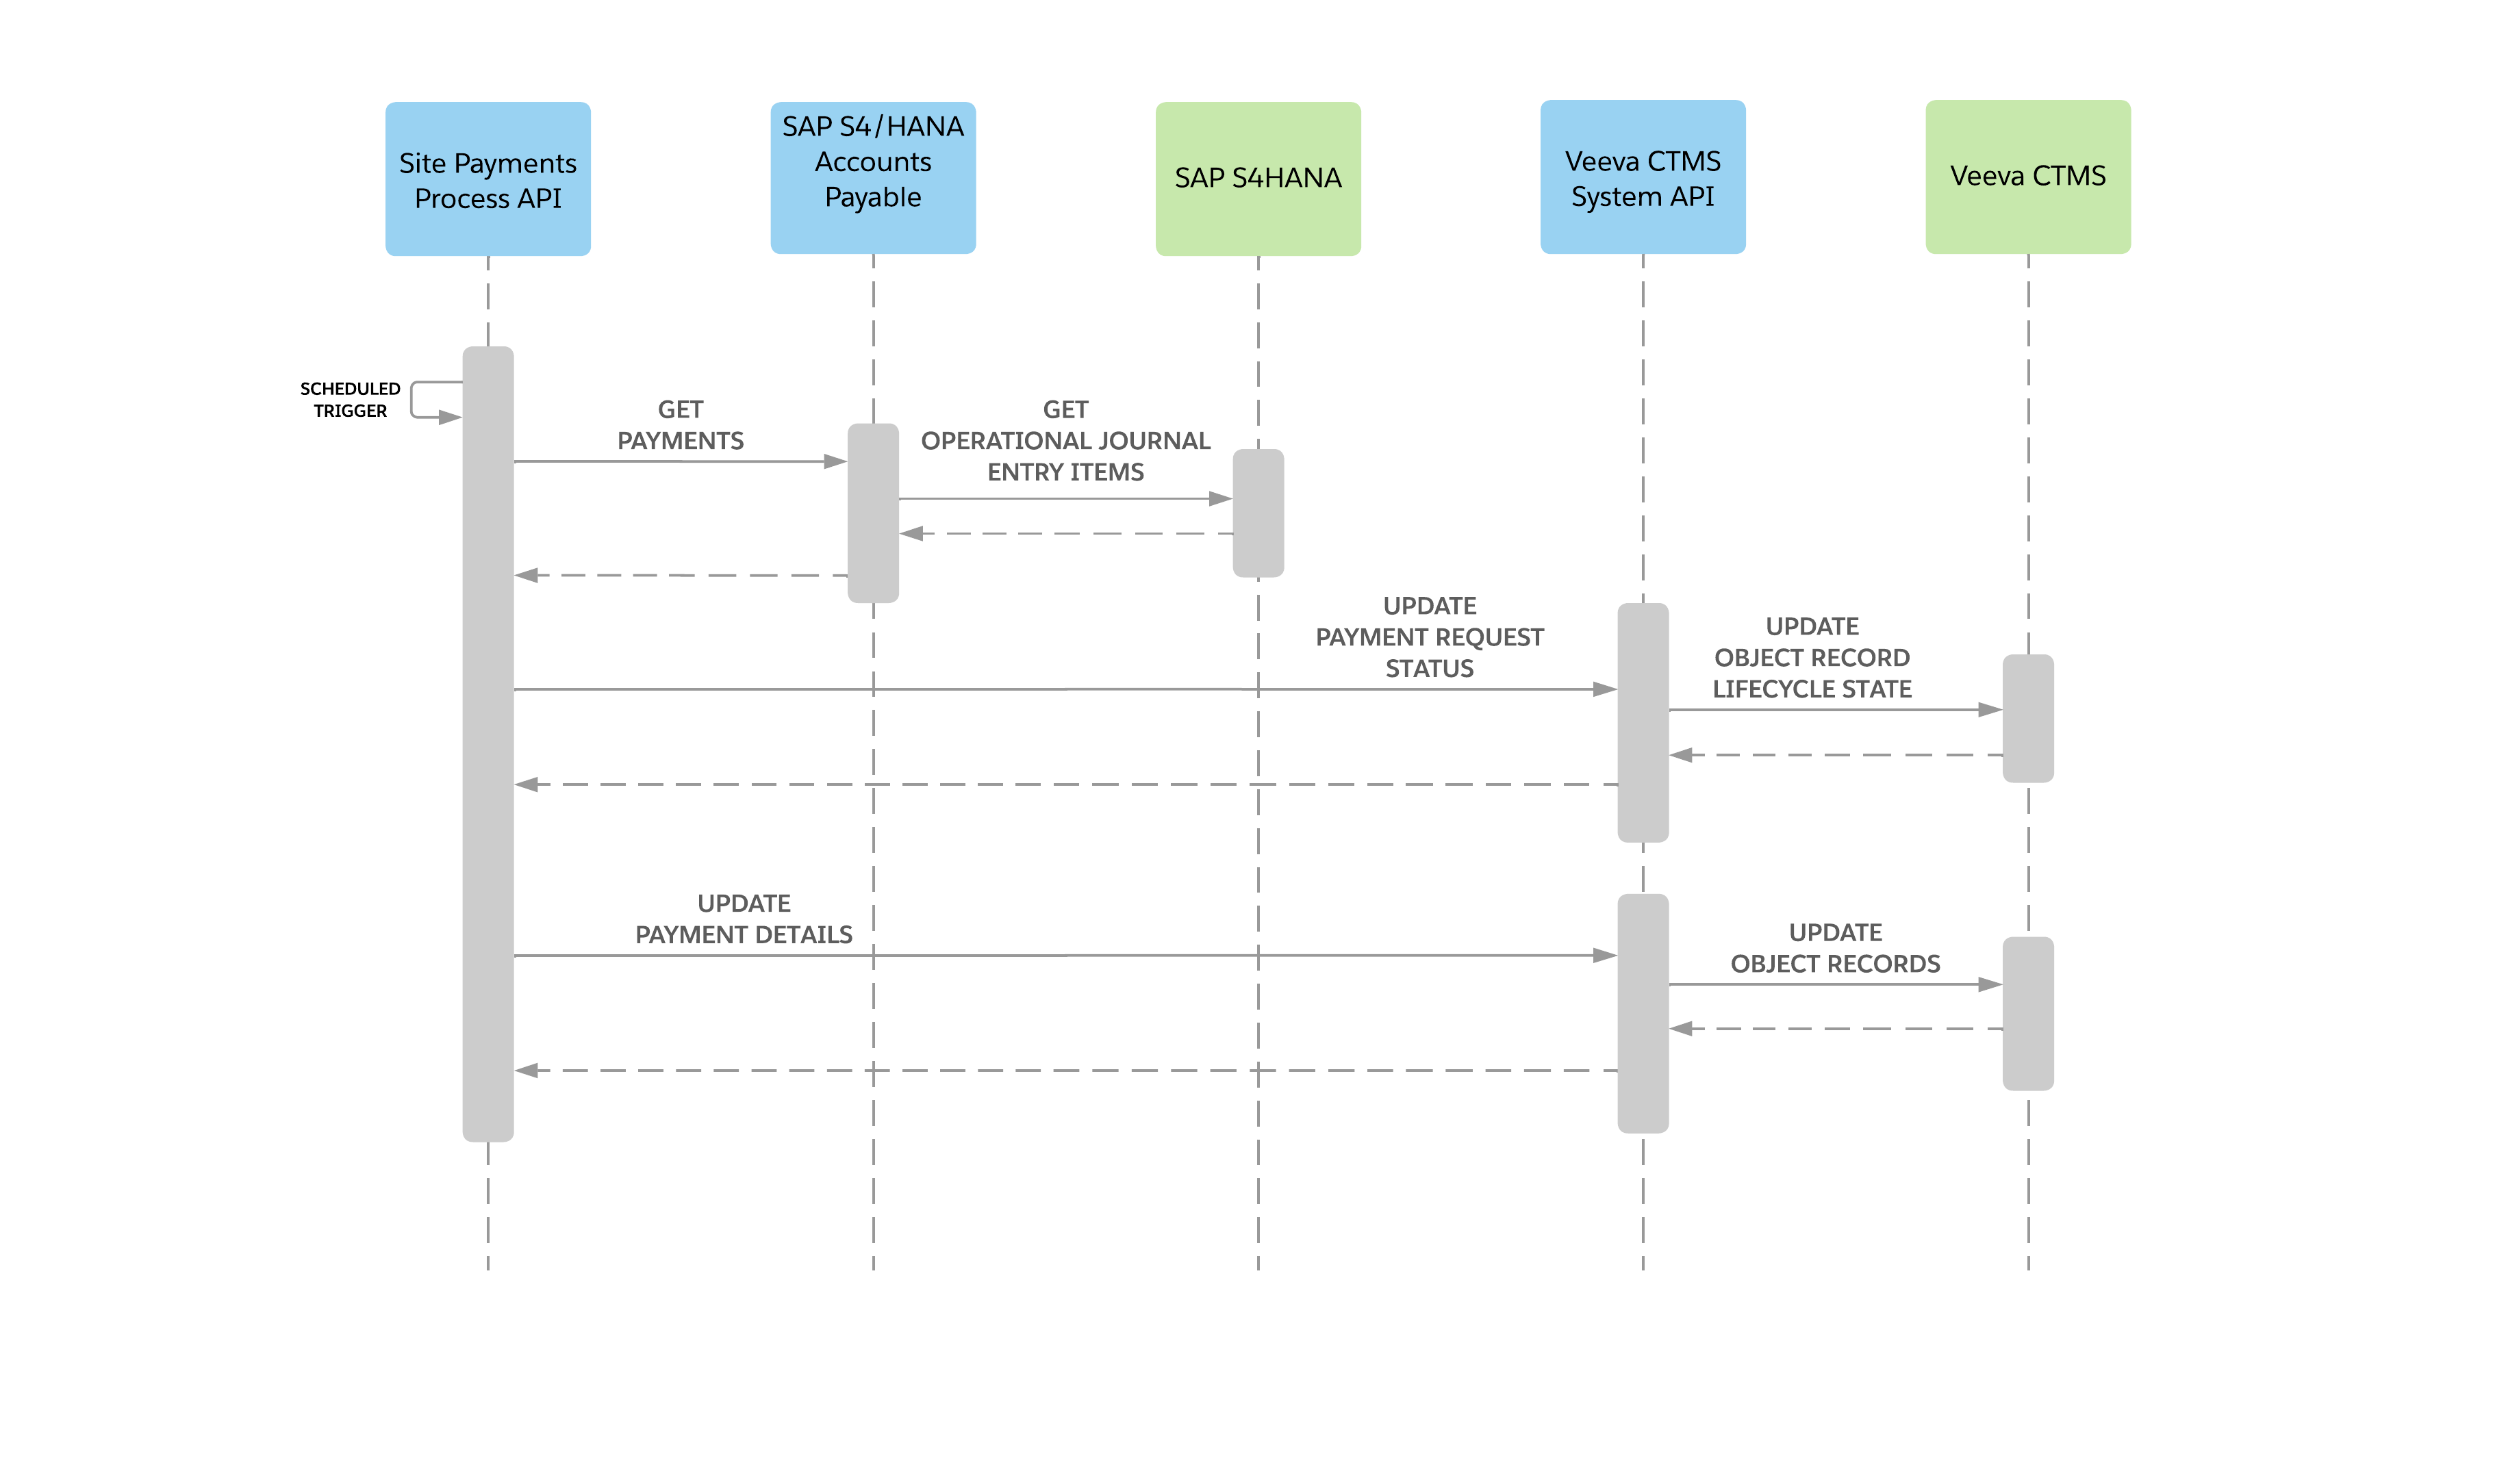 Sequence diagram for updating payment details in Veeva CTMS